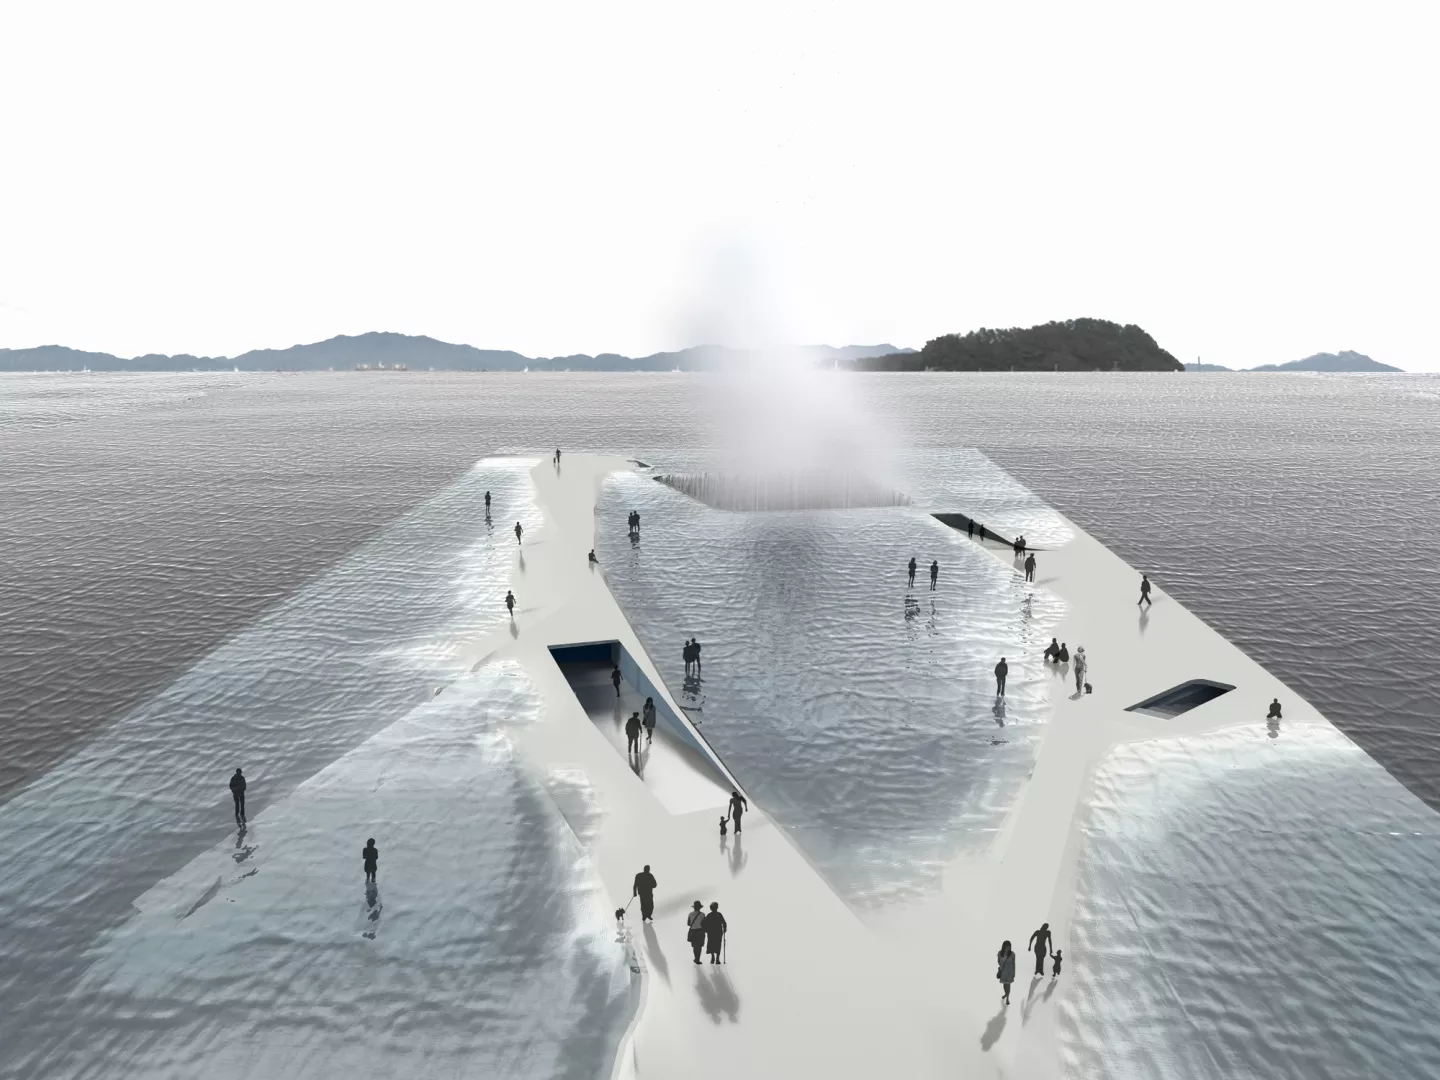 This incredible floating installation allows you to walk on water